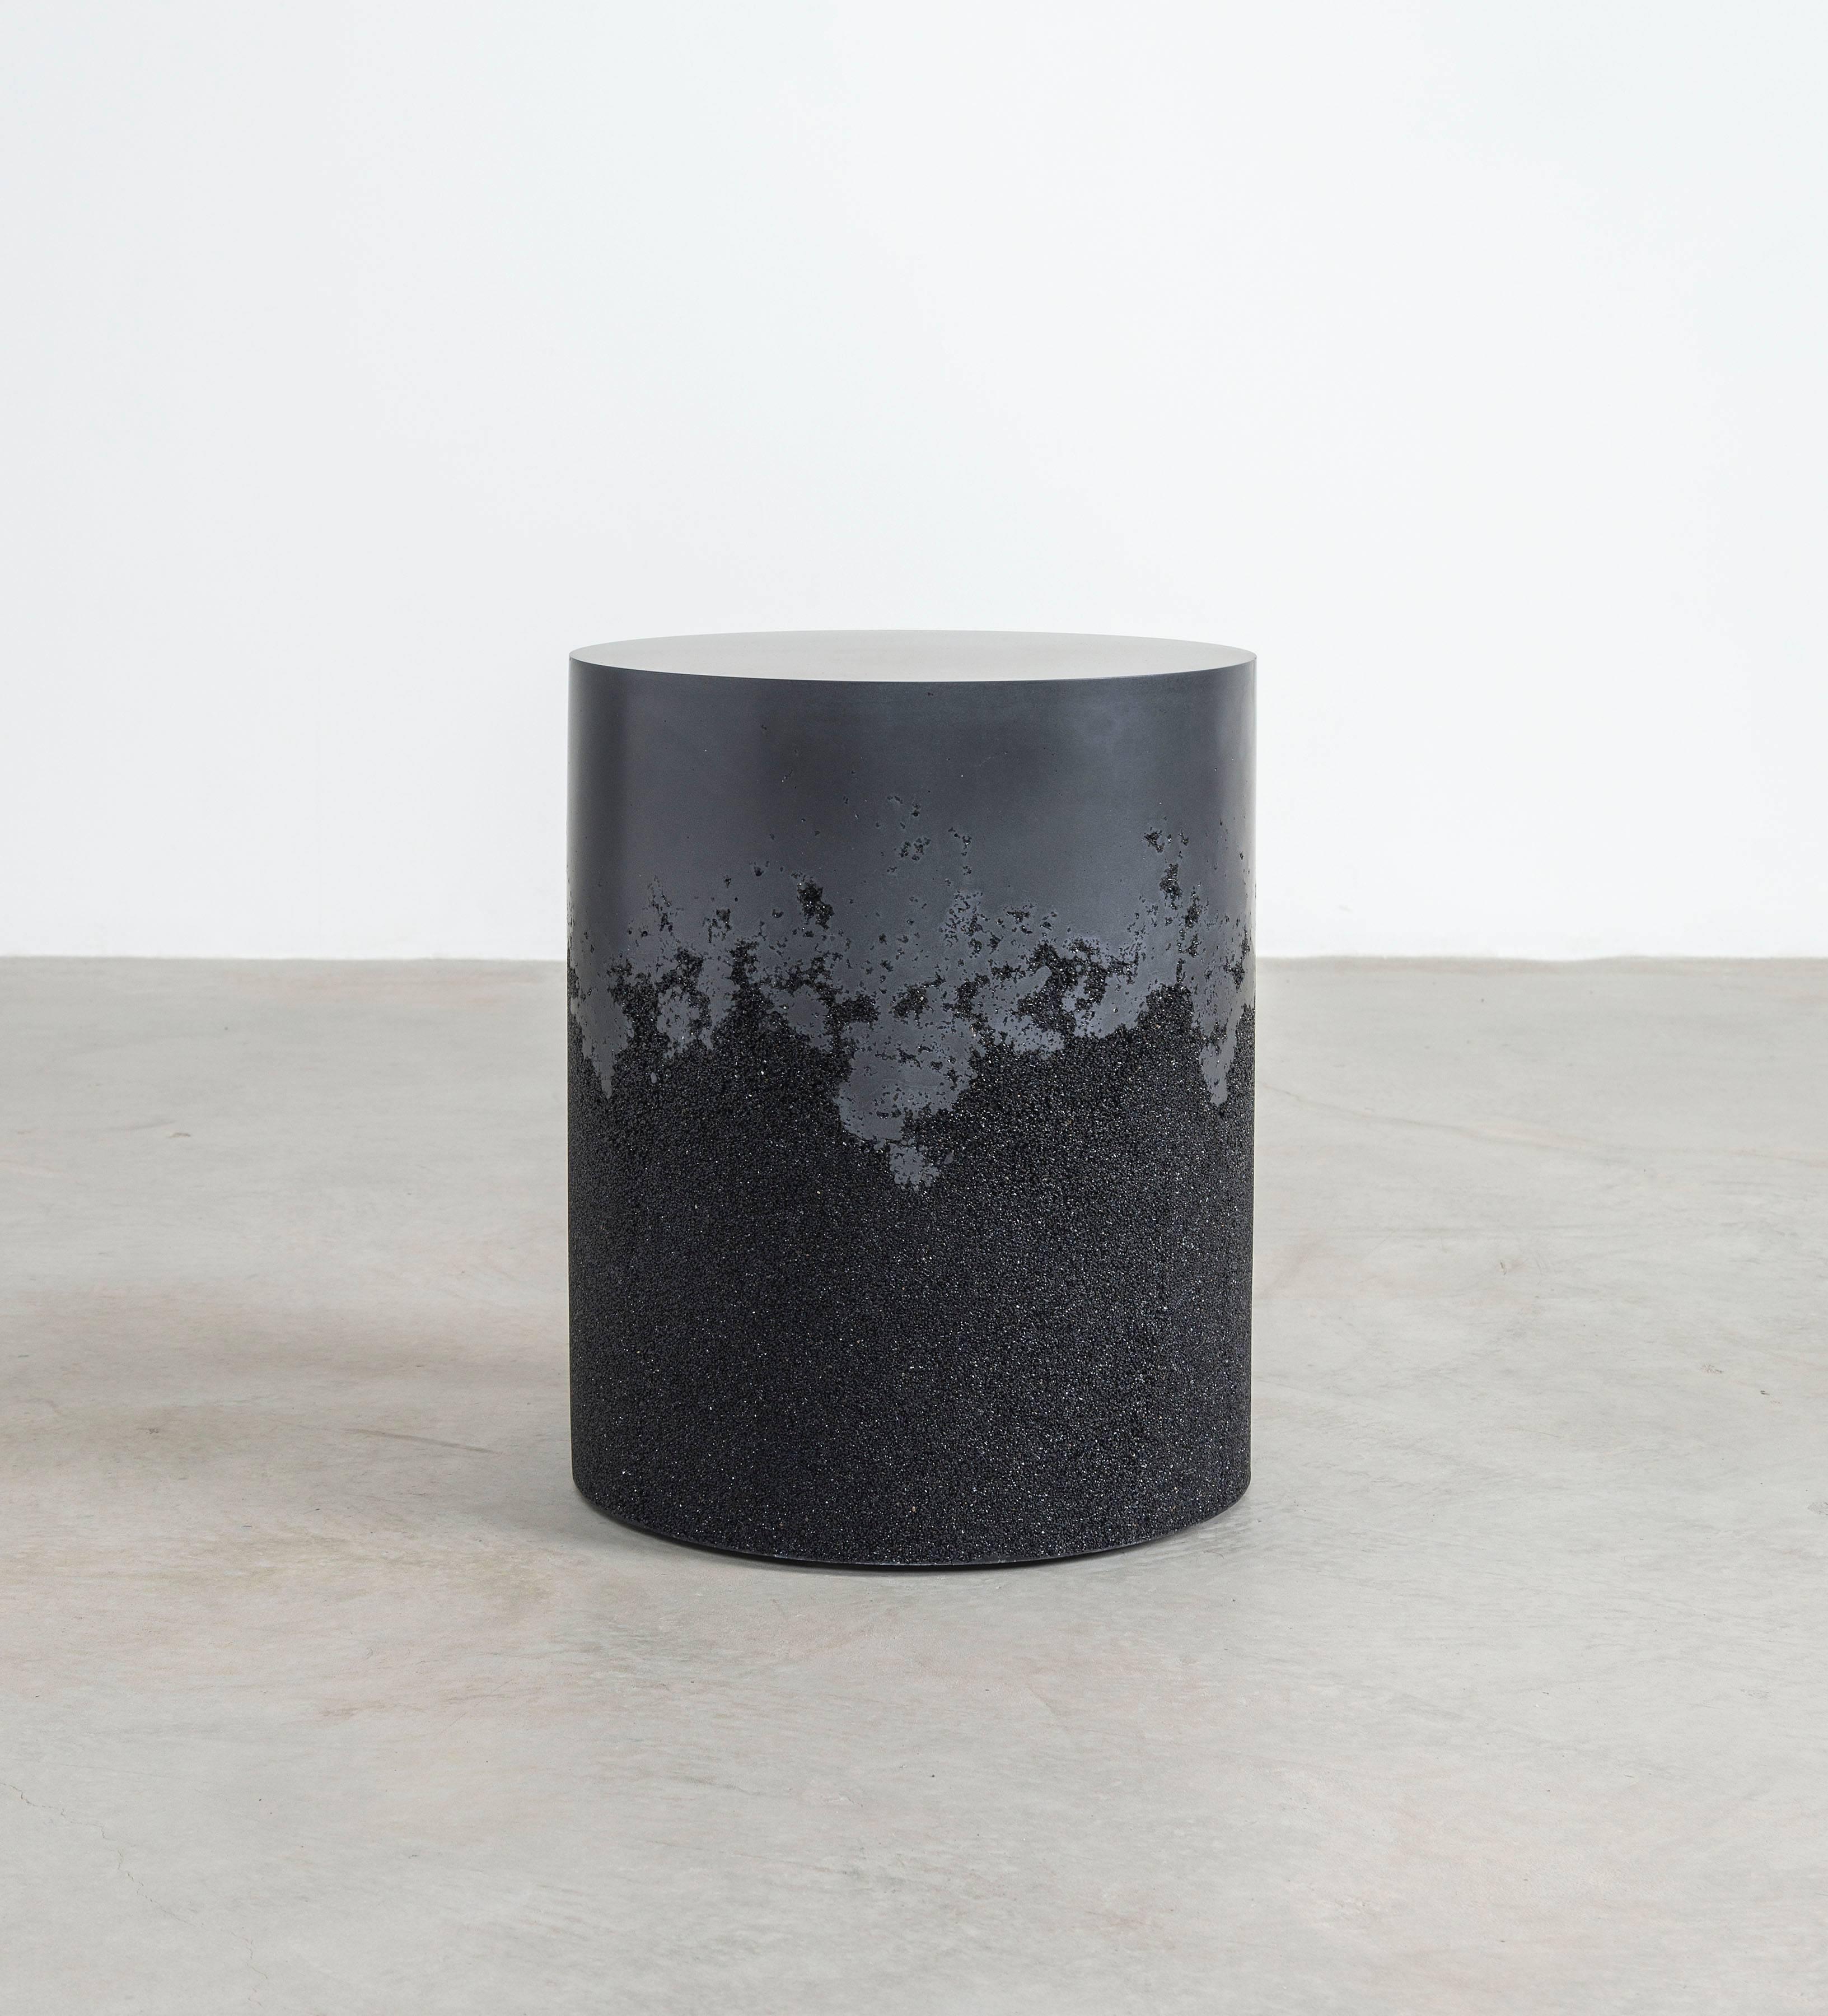 A layering of cement and crushed aggregates, the made-to-order drum consists of an hand-dyed black cement top and a packed black silica bottom. Poured by hand over the jagged minerals, the black cement merges the materials to create a unique organic